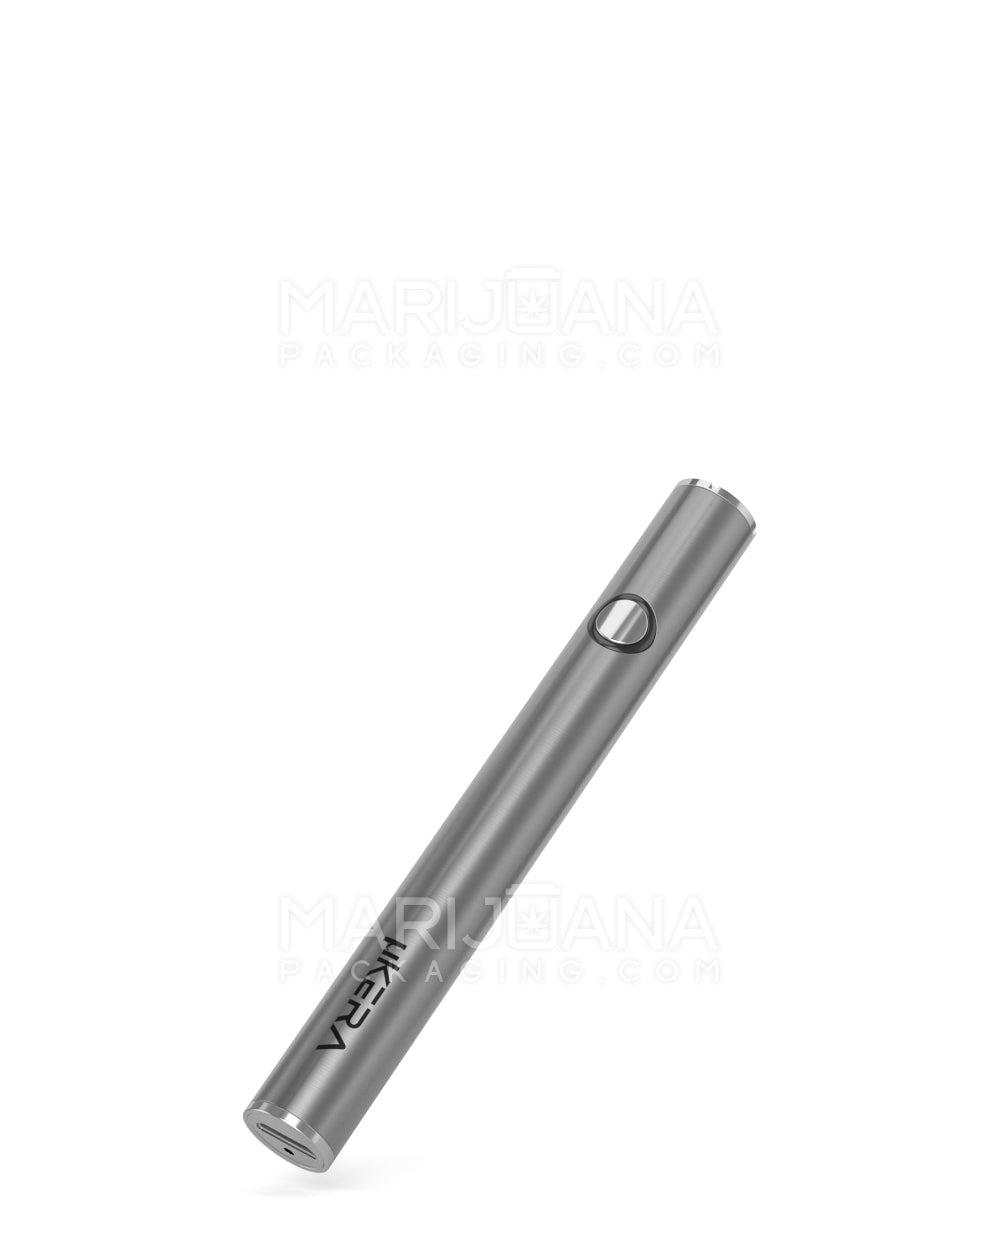 RAE | Variable Voltage Vape Battery | 320mAh - Silver - 640 Count - 4